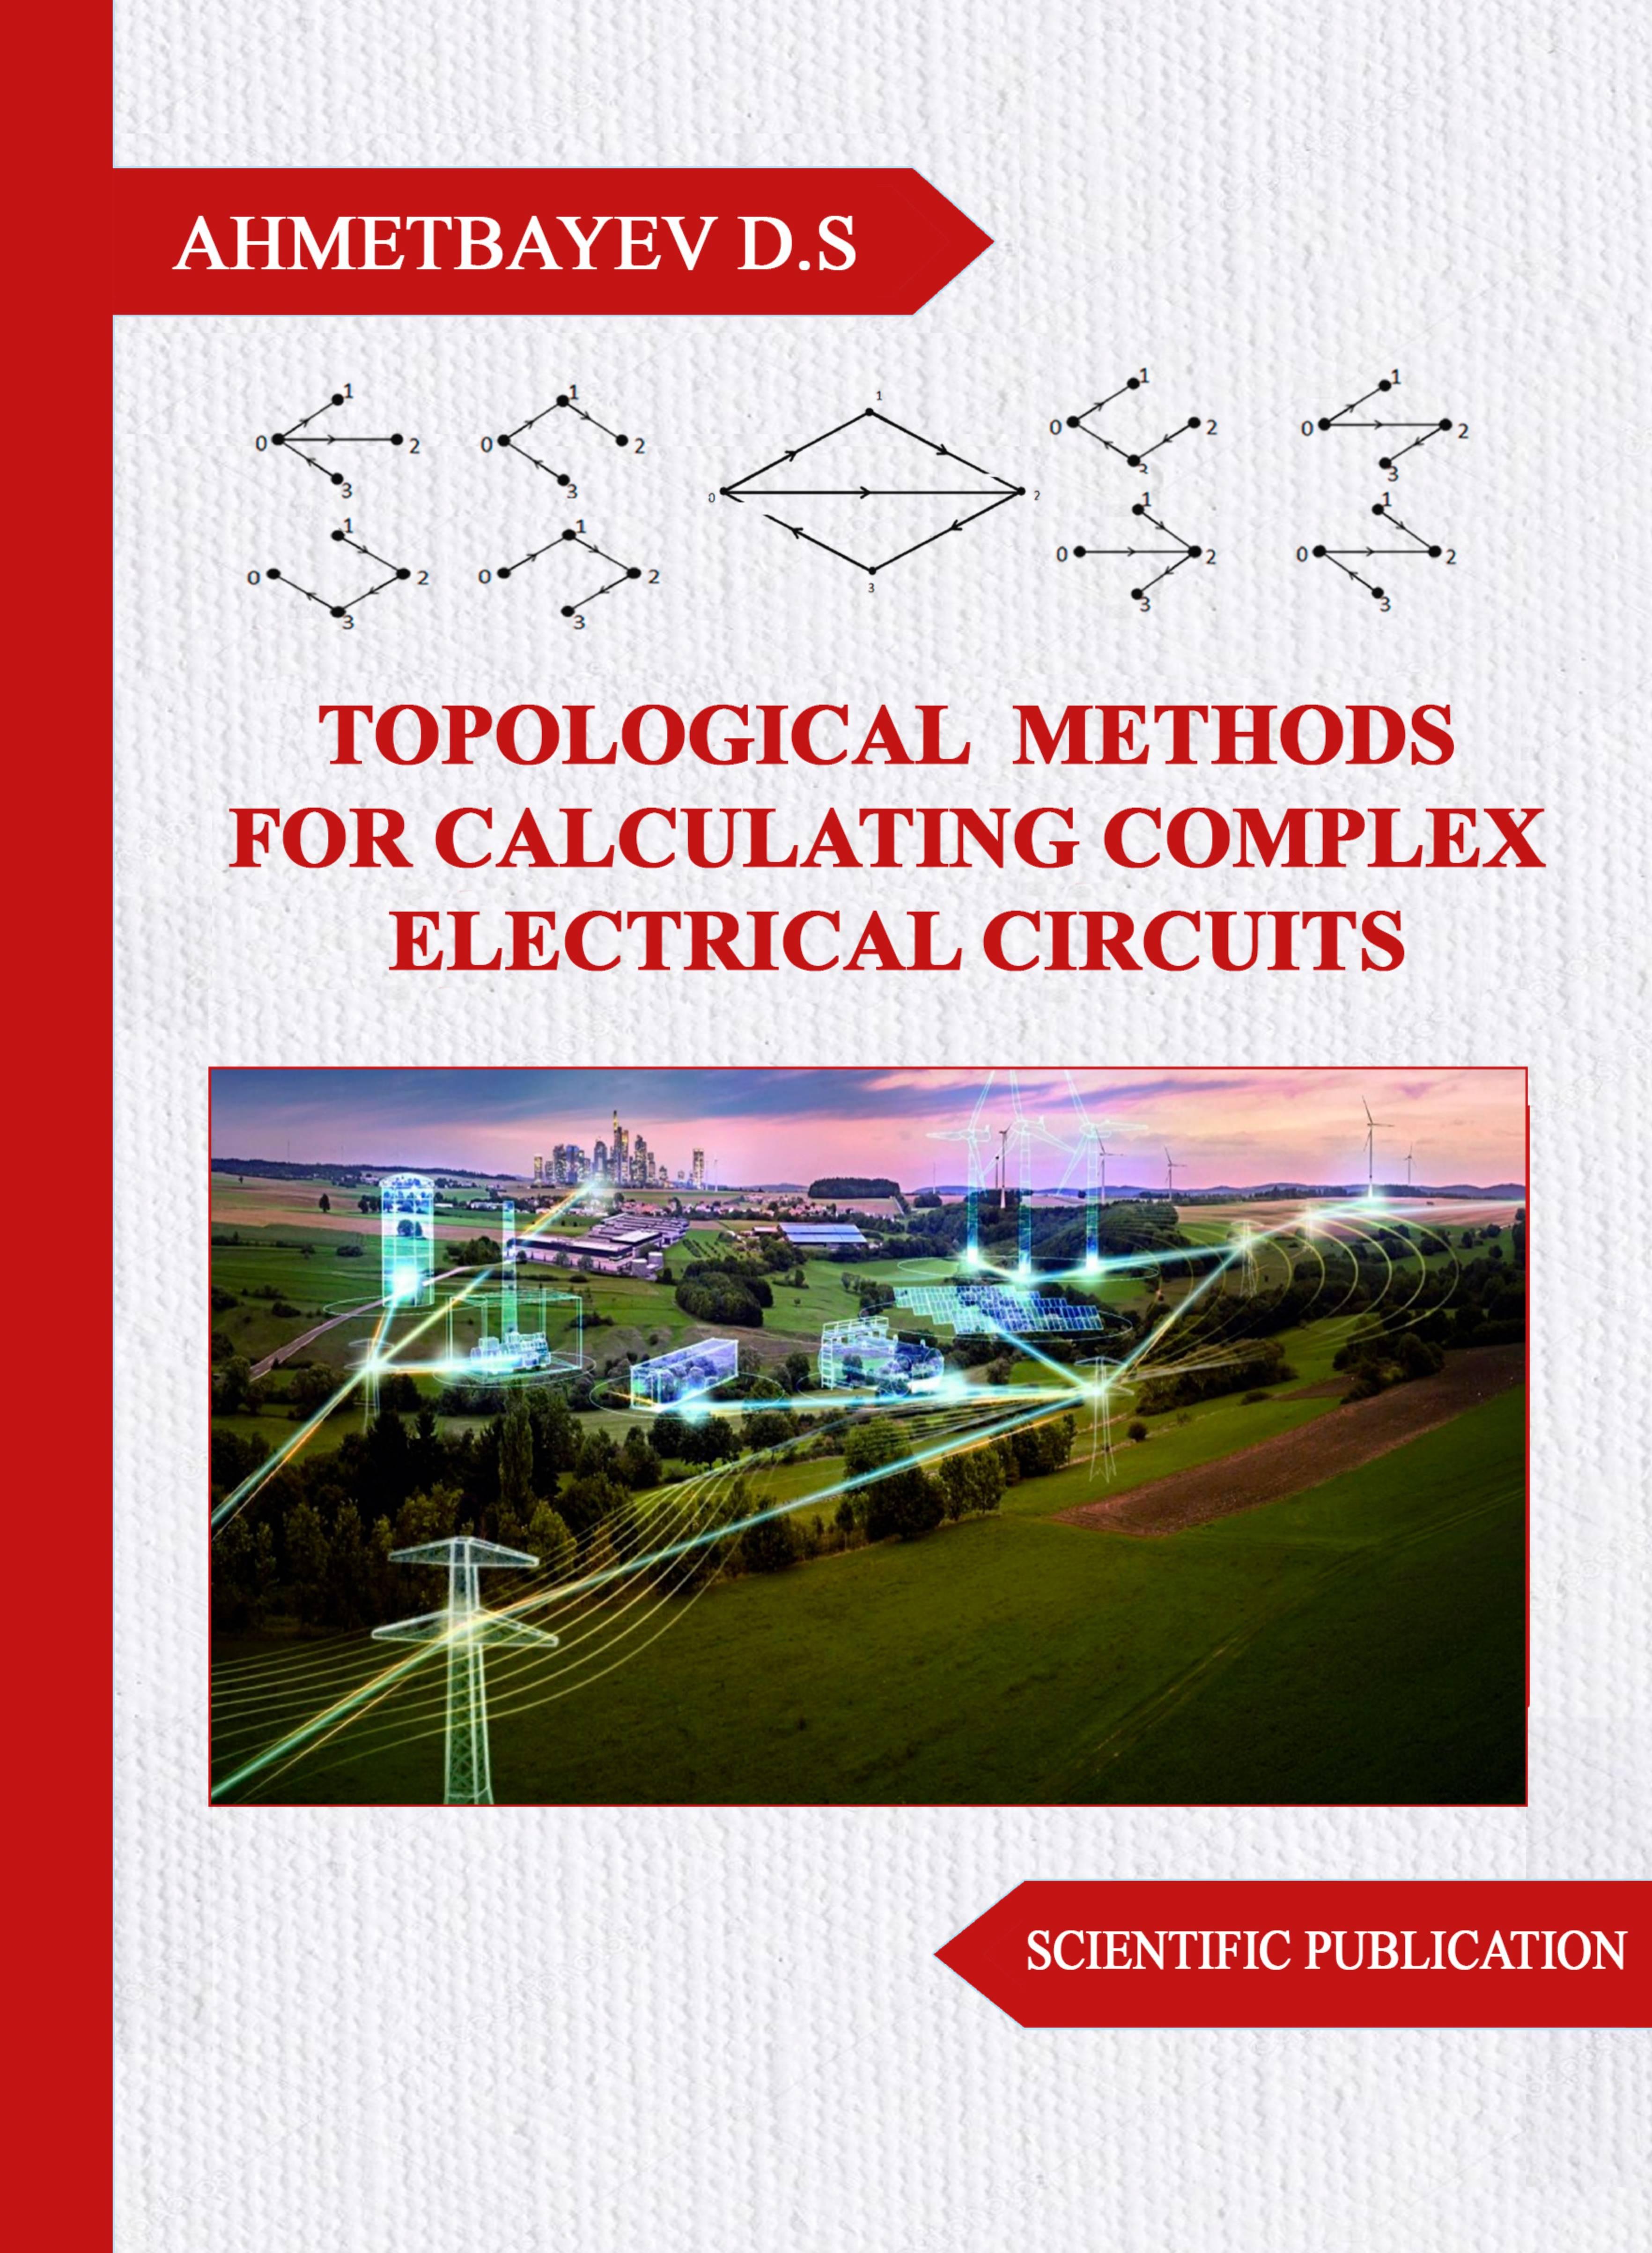 Topological Methods for Calculating Complex Electrical Circuits.